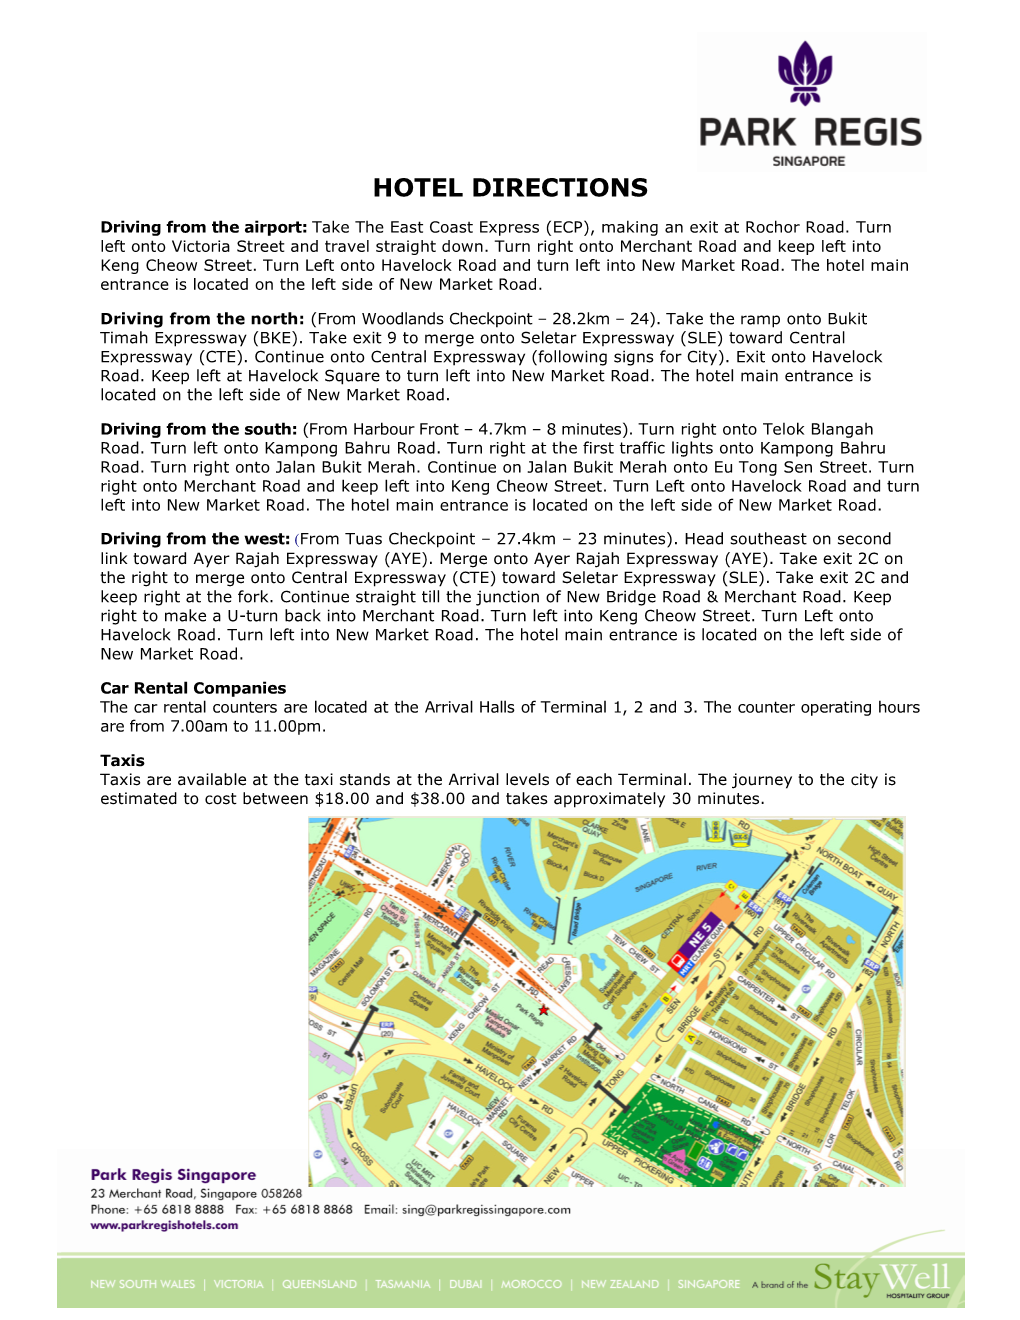 Hotel Directions